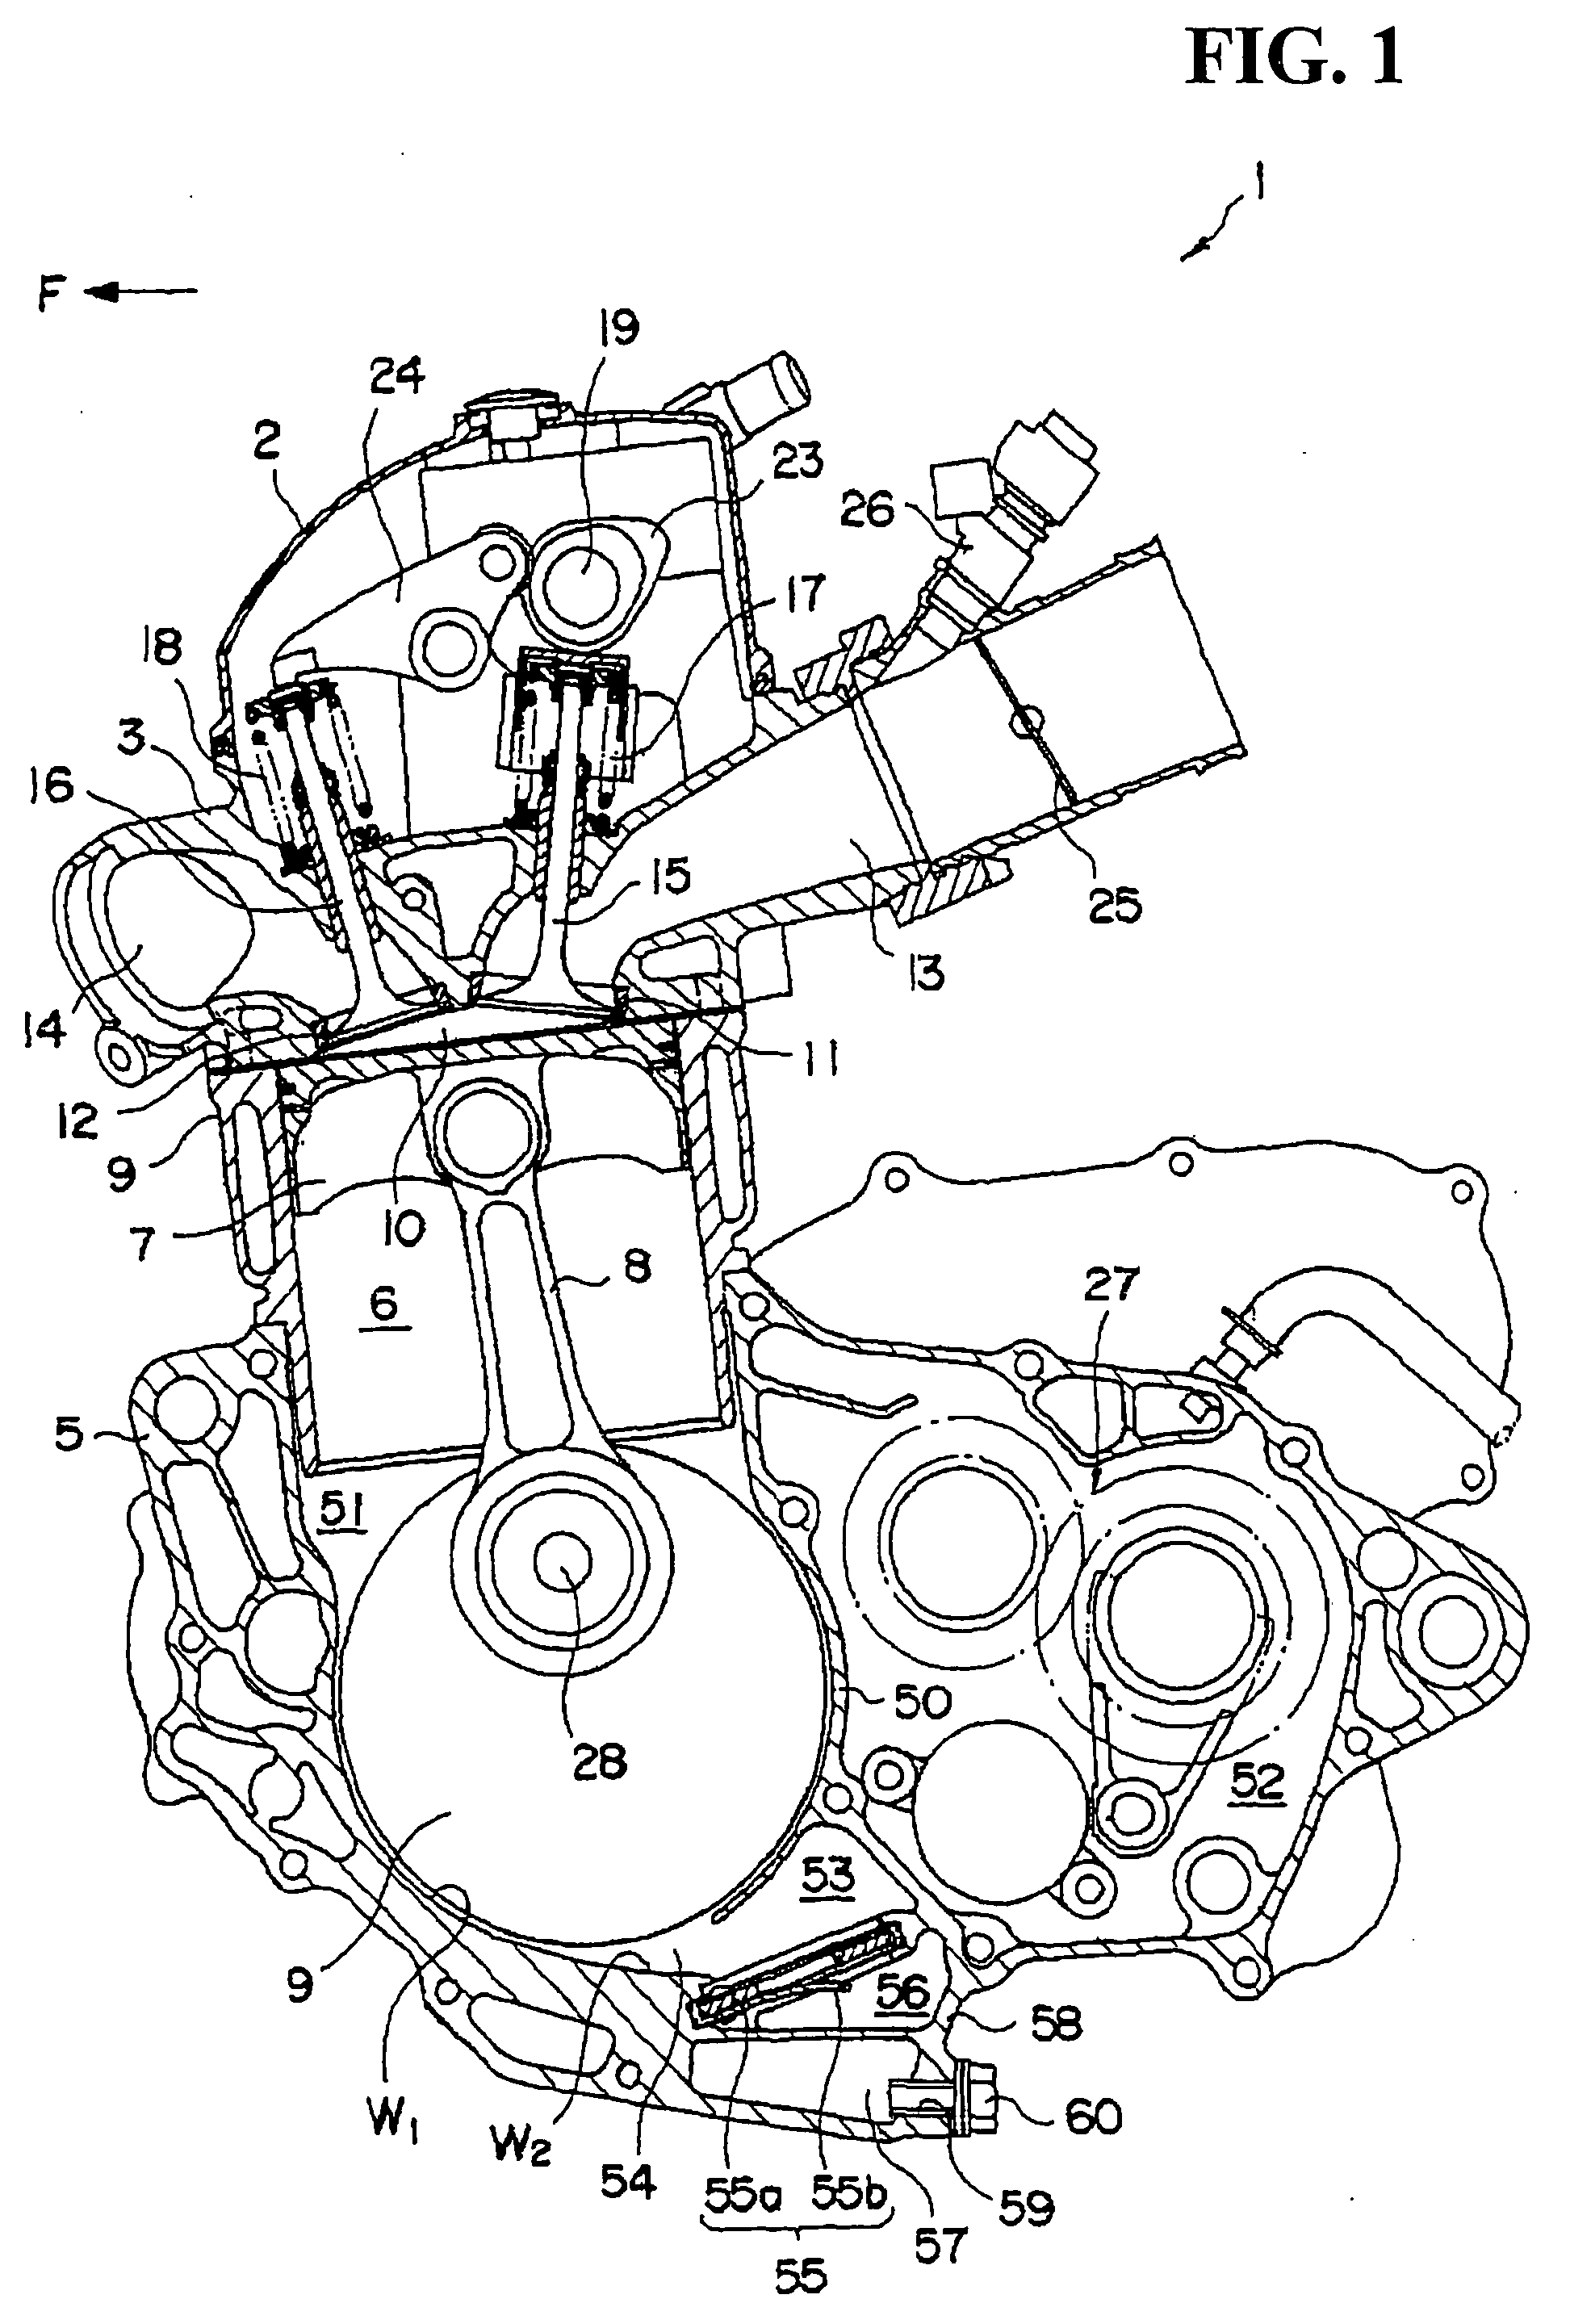 Lubrication structure of engine